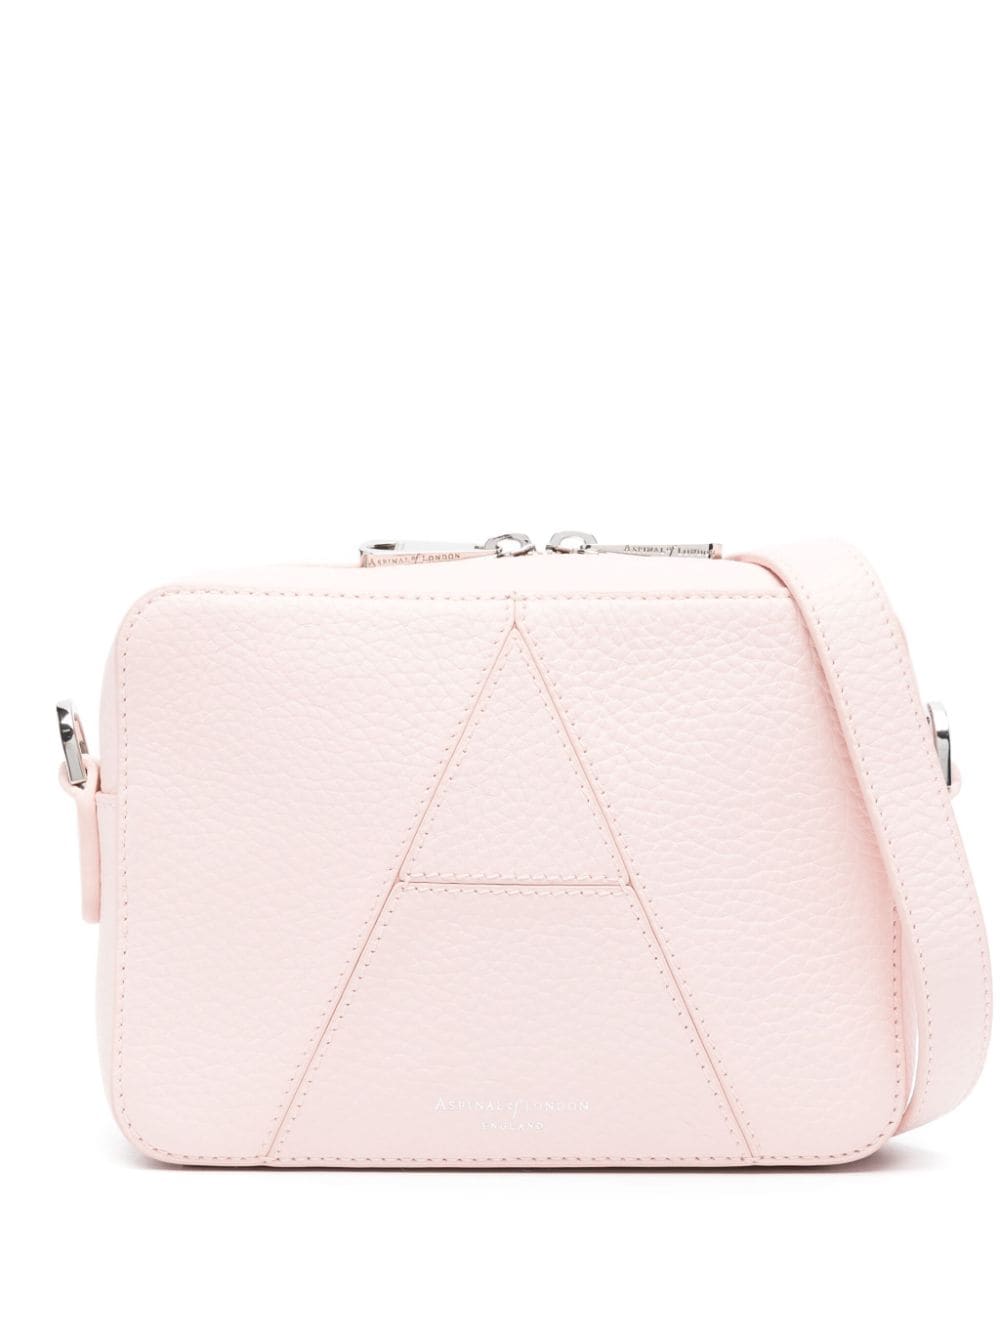 Aspinal Of London Camera leather cross body bag - Pink von Aspinal Of London